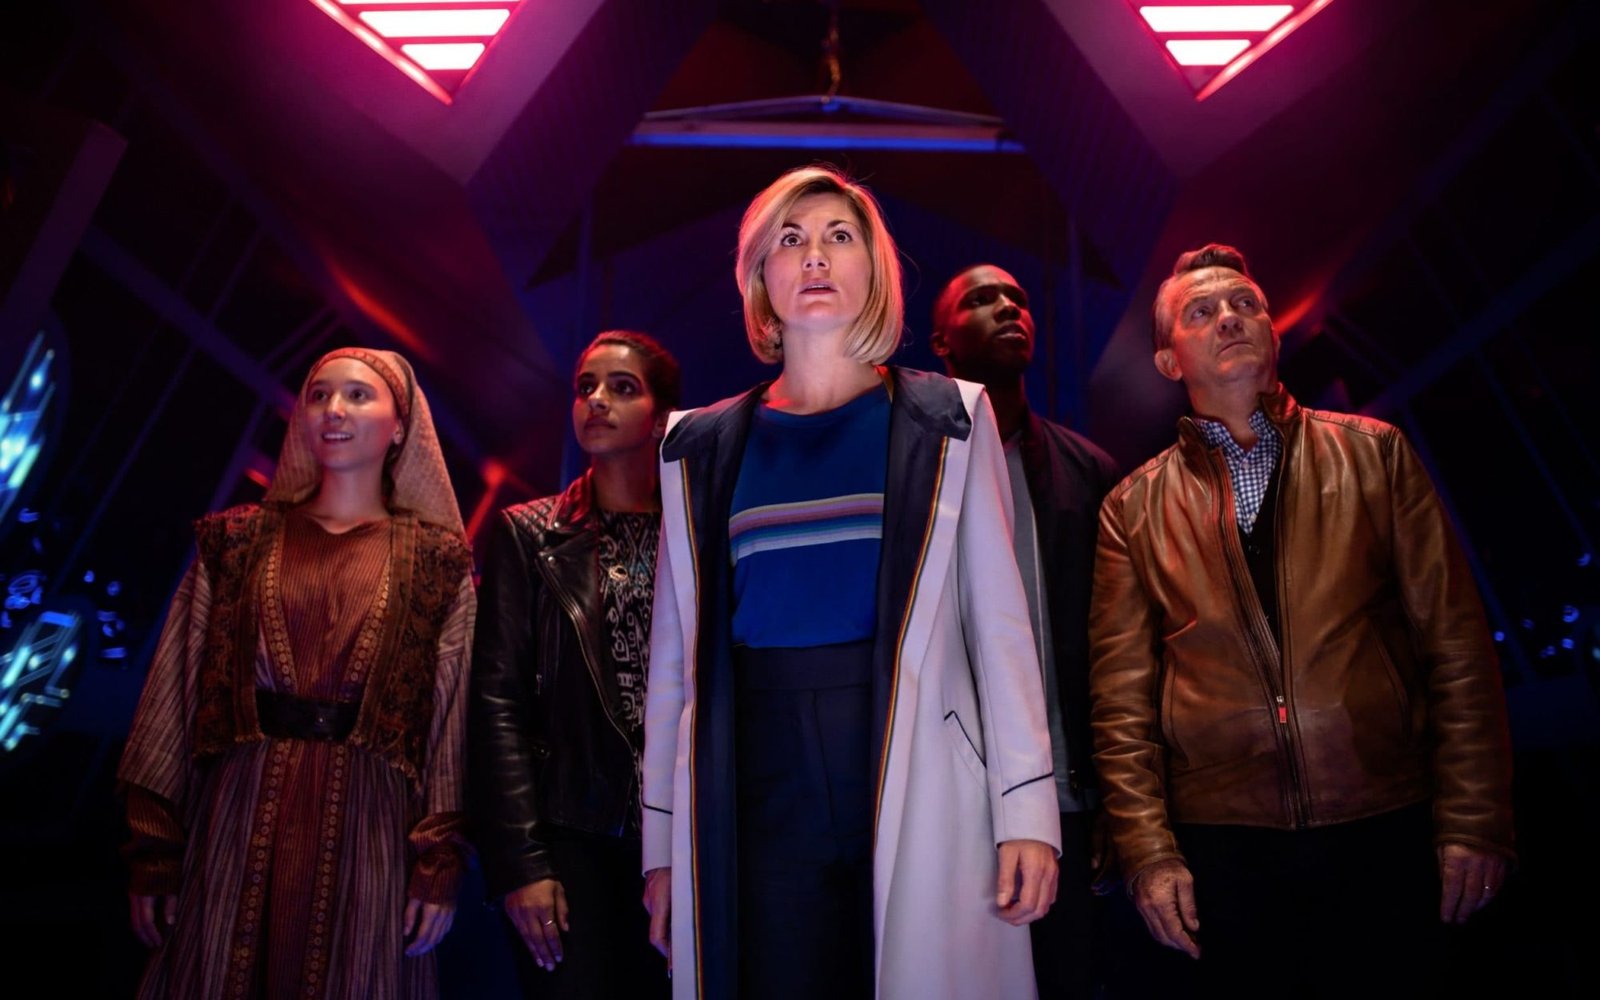 Jodie Whittaker: Chris Chibnall “Wanted Me to Come In With a Very Fresh Perspective”